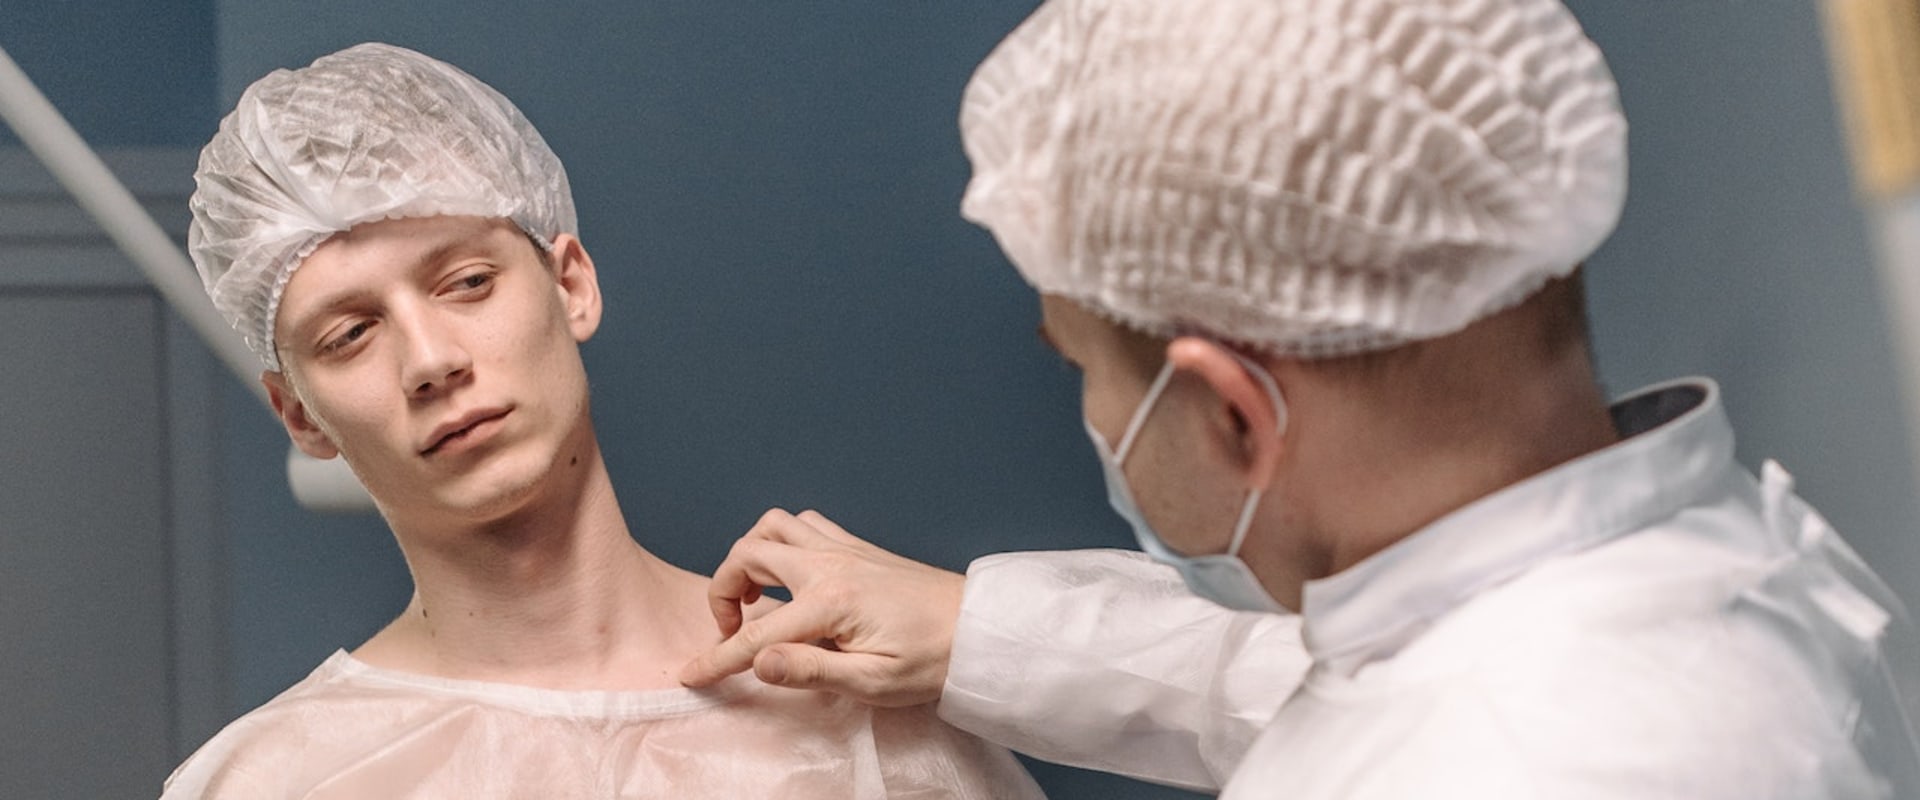 Looking For The Best Shoulder Surgeon In Las Vegas? Discover The Top Aesthetic Surgery Options